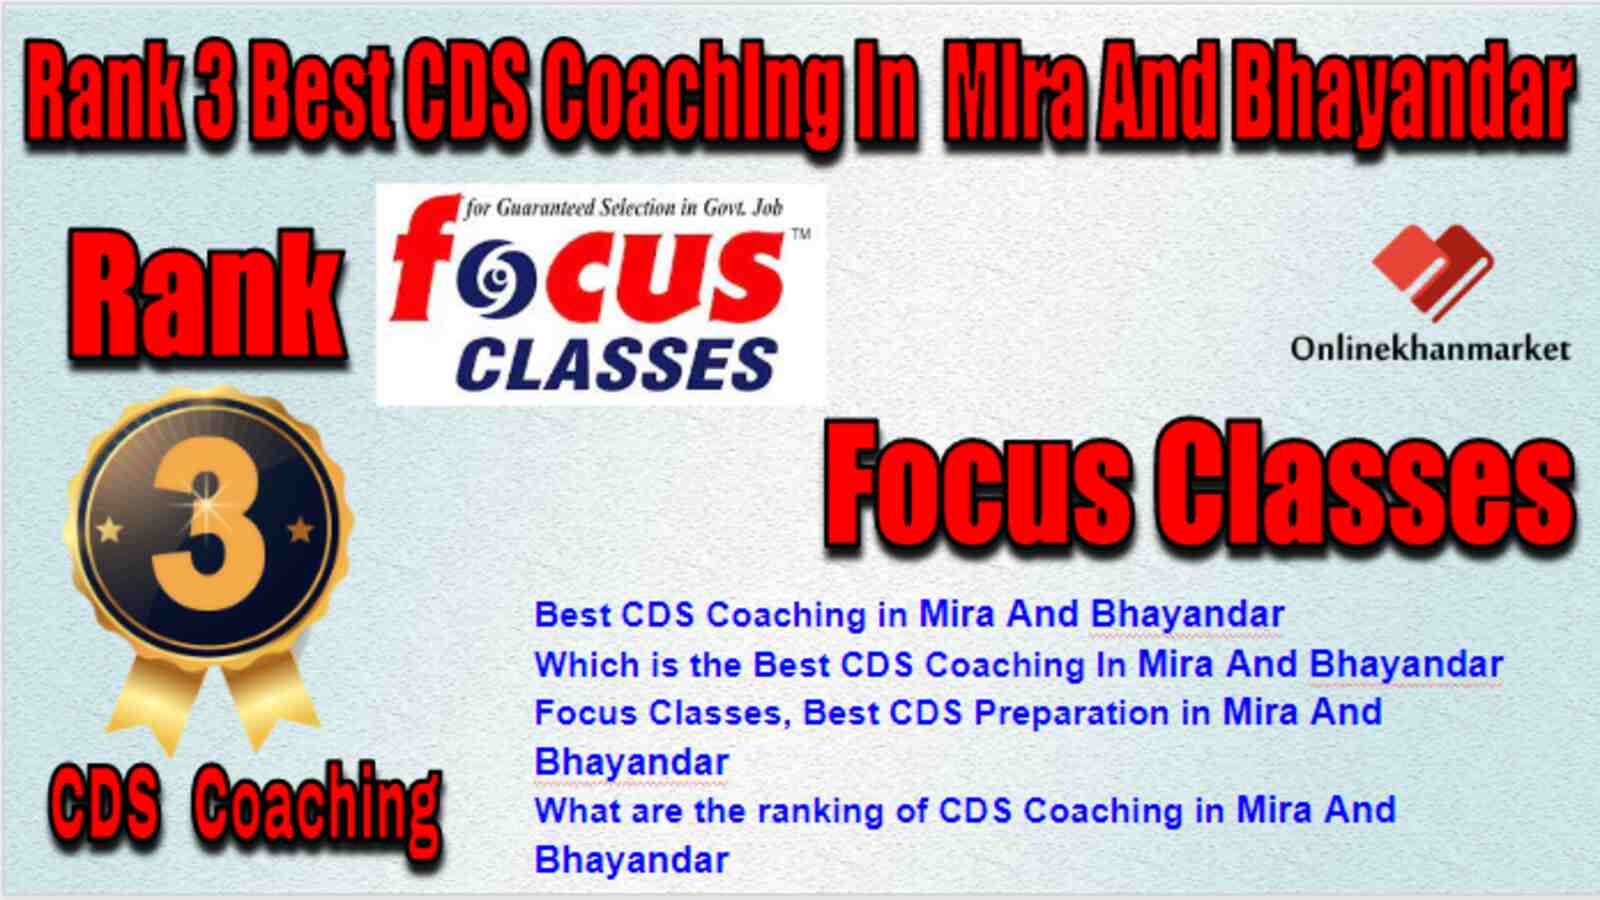 Rank 3 Best CDS Coaching in Mira and Bhayandar